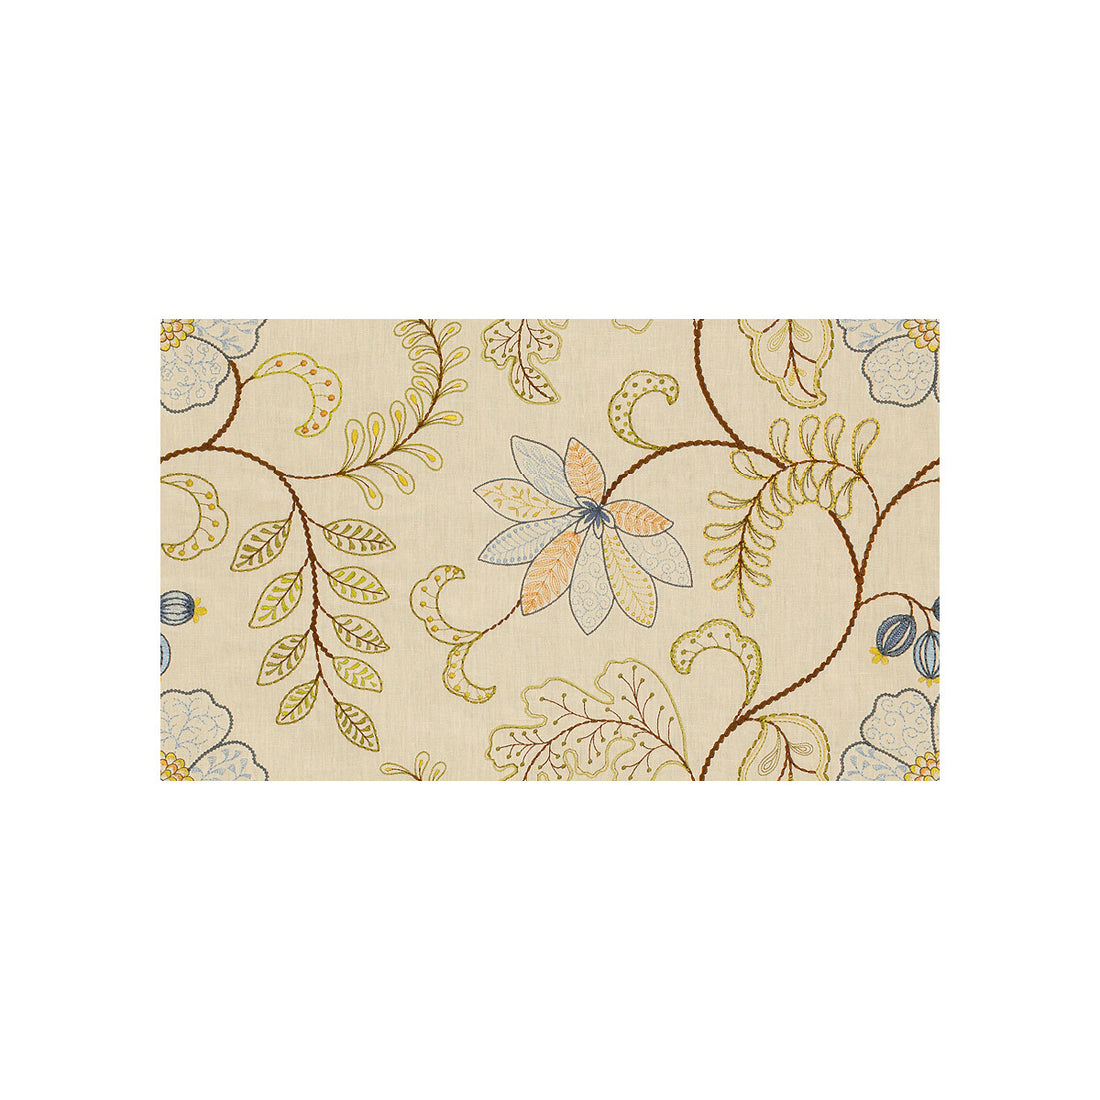 Hanging Garden fabric in quince color - pattern 3570.516.0 - by Kravet Couture in the Modern Colors II collection